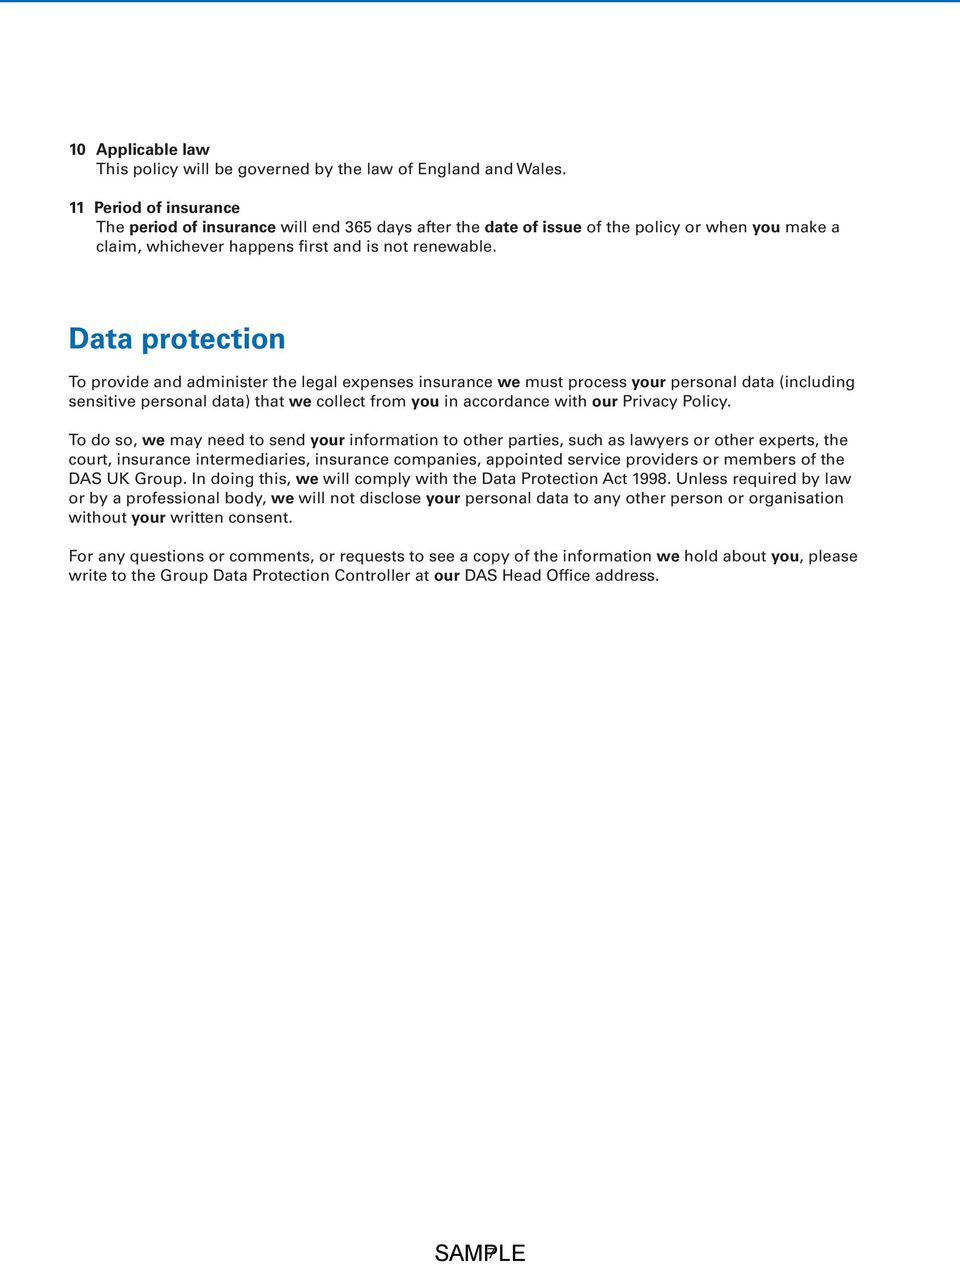 Data protection To provide and administer the legal expenses insurance we must process your personal data (including sensitive personal data) that we collect from you in accordance with our Privacy